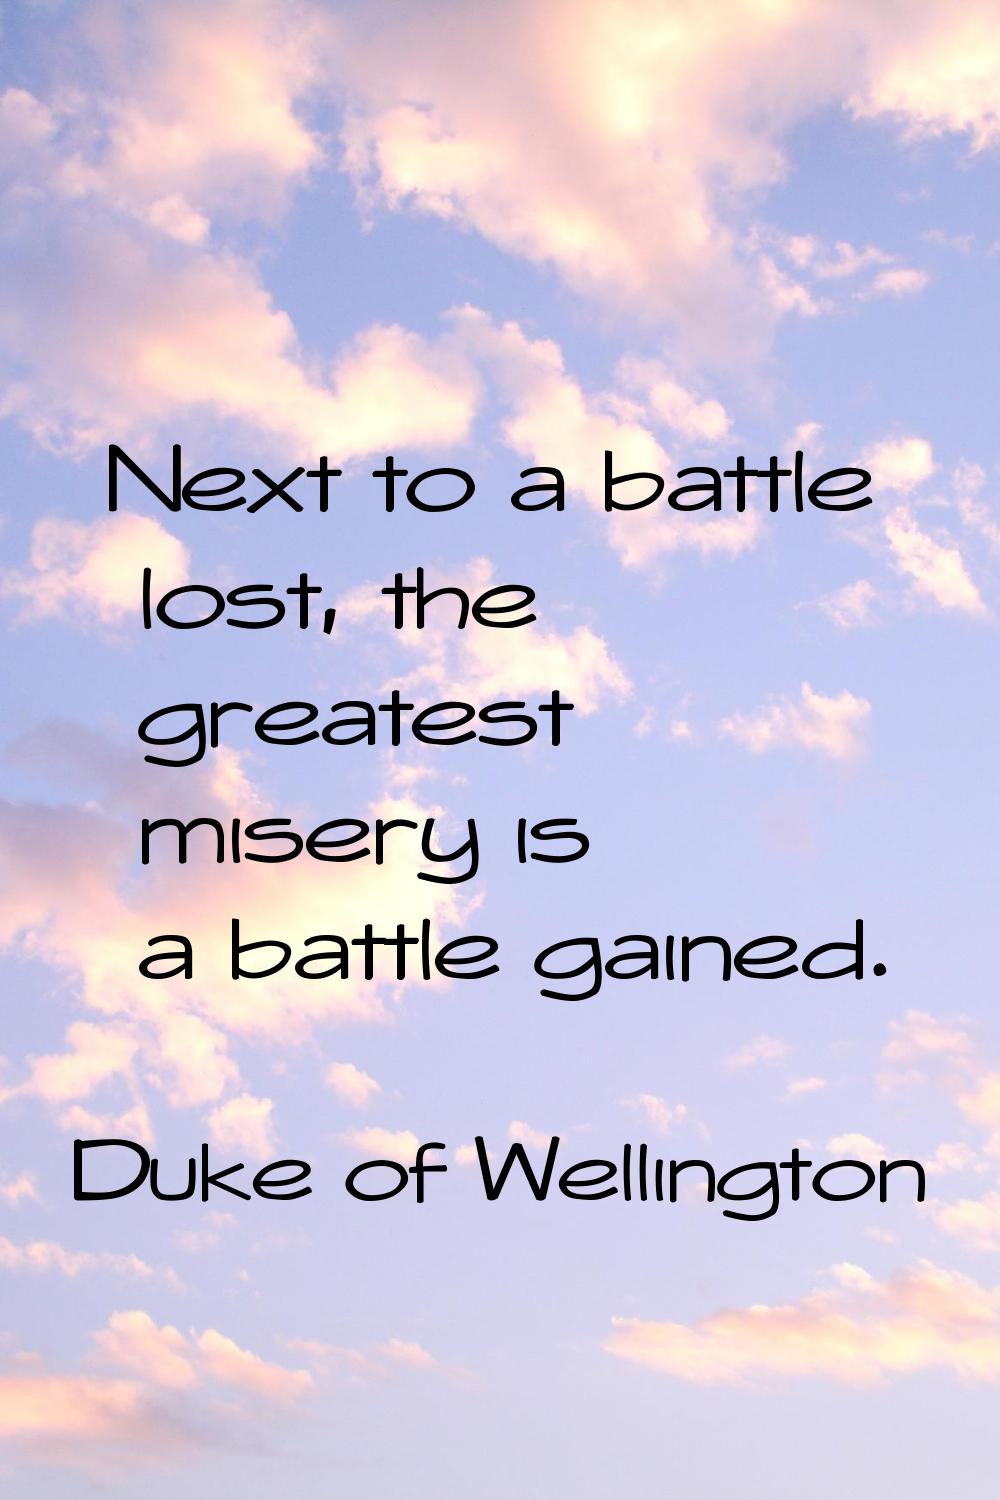 Next to a battle lost, the greatest misery is a battle gained.